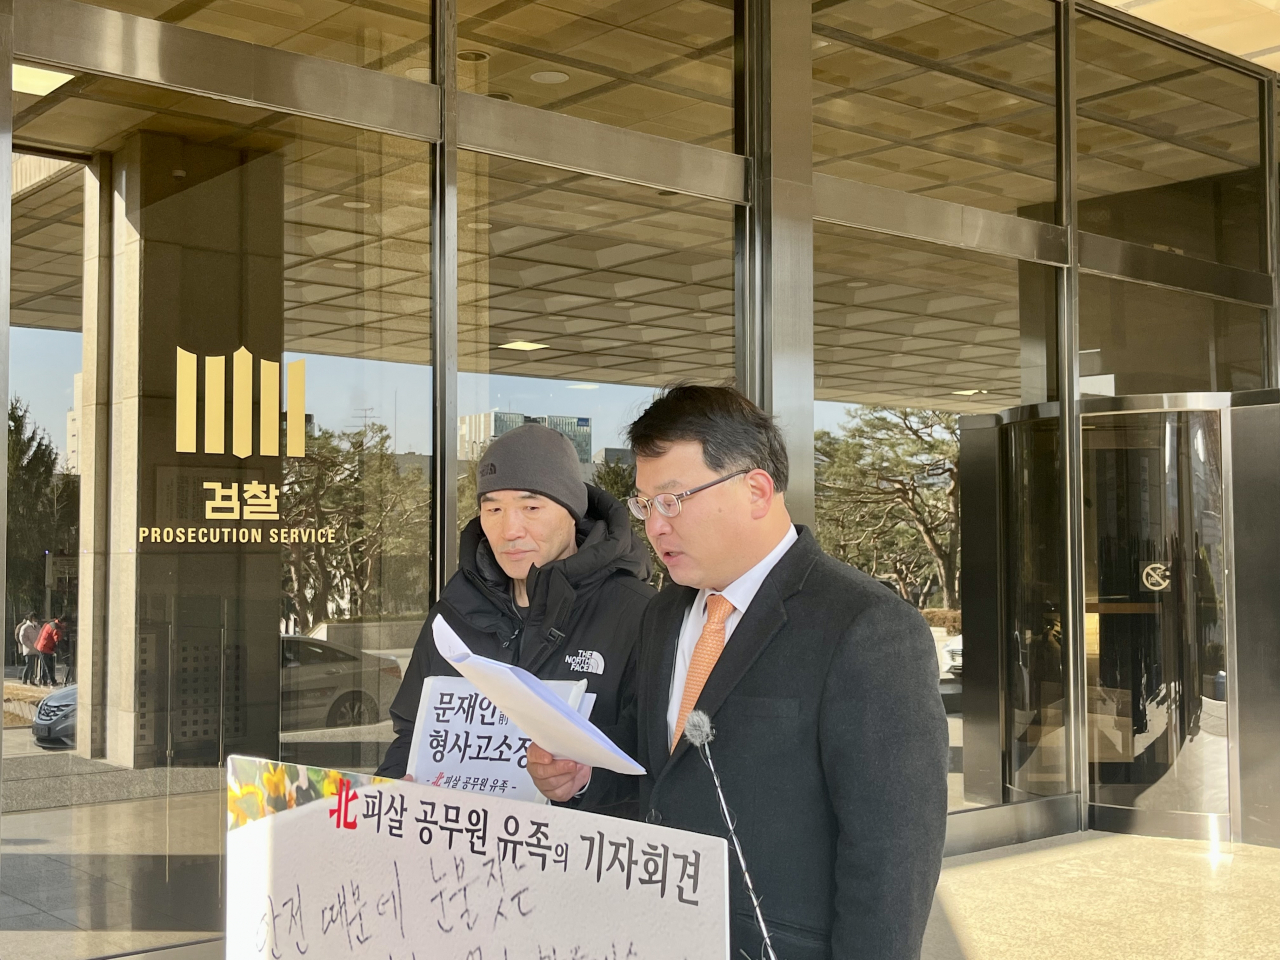 Lee Rae-jin, the brother of the South Korean official who was shot dead by North Korean soldiers at sea in 2020, (left) speaks to reporters outside the Seoul central district prosecutors’ office on Wednesday. On the right is his lawyer, Kim Ki-yun. (Kim Arin/The Korea Herald)